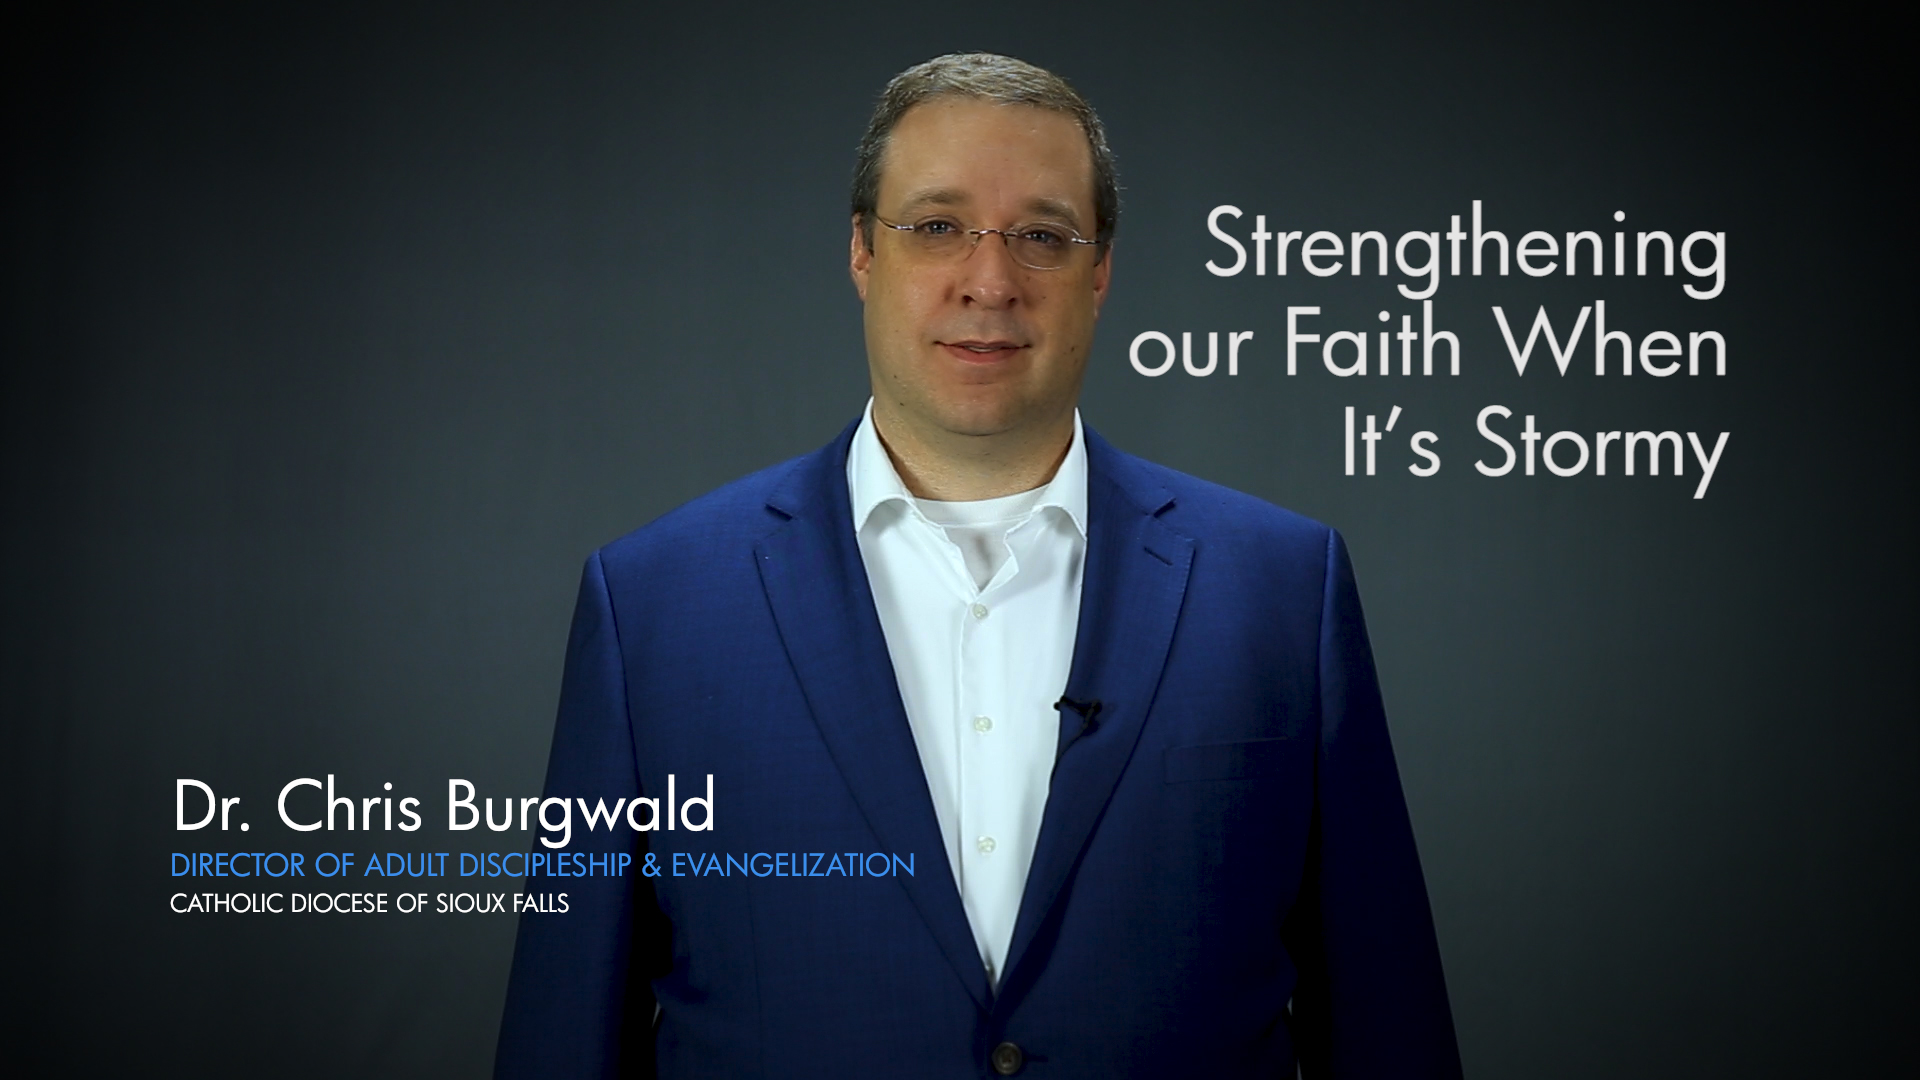 Strengthening our Faith When It’s Stormy